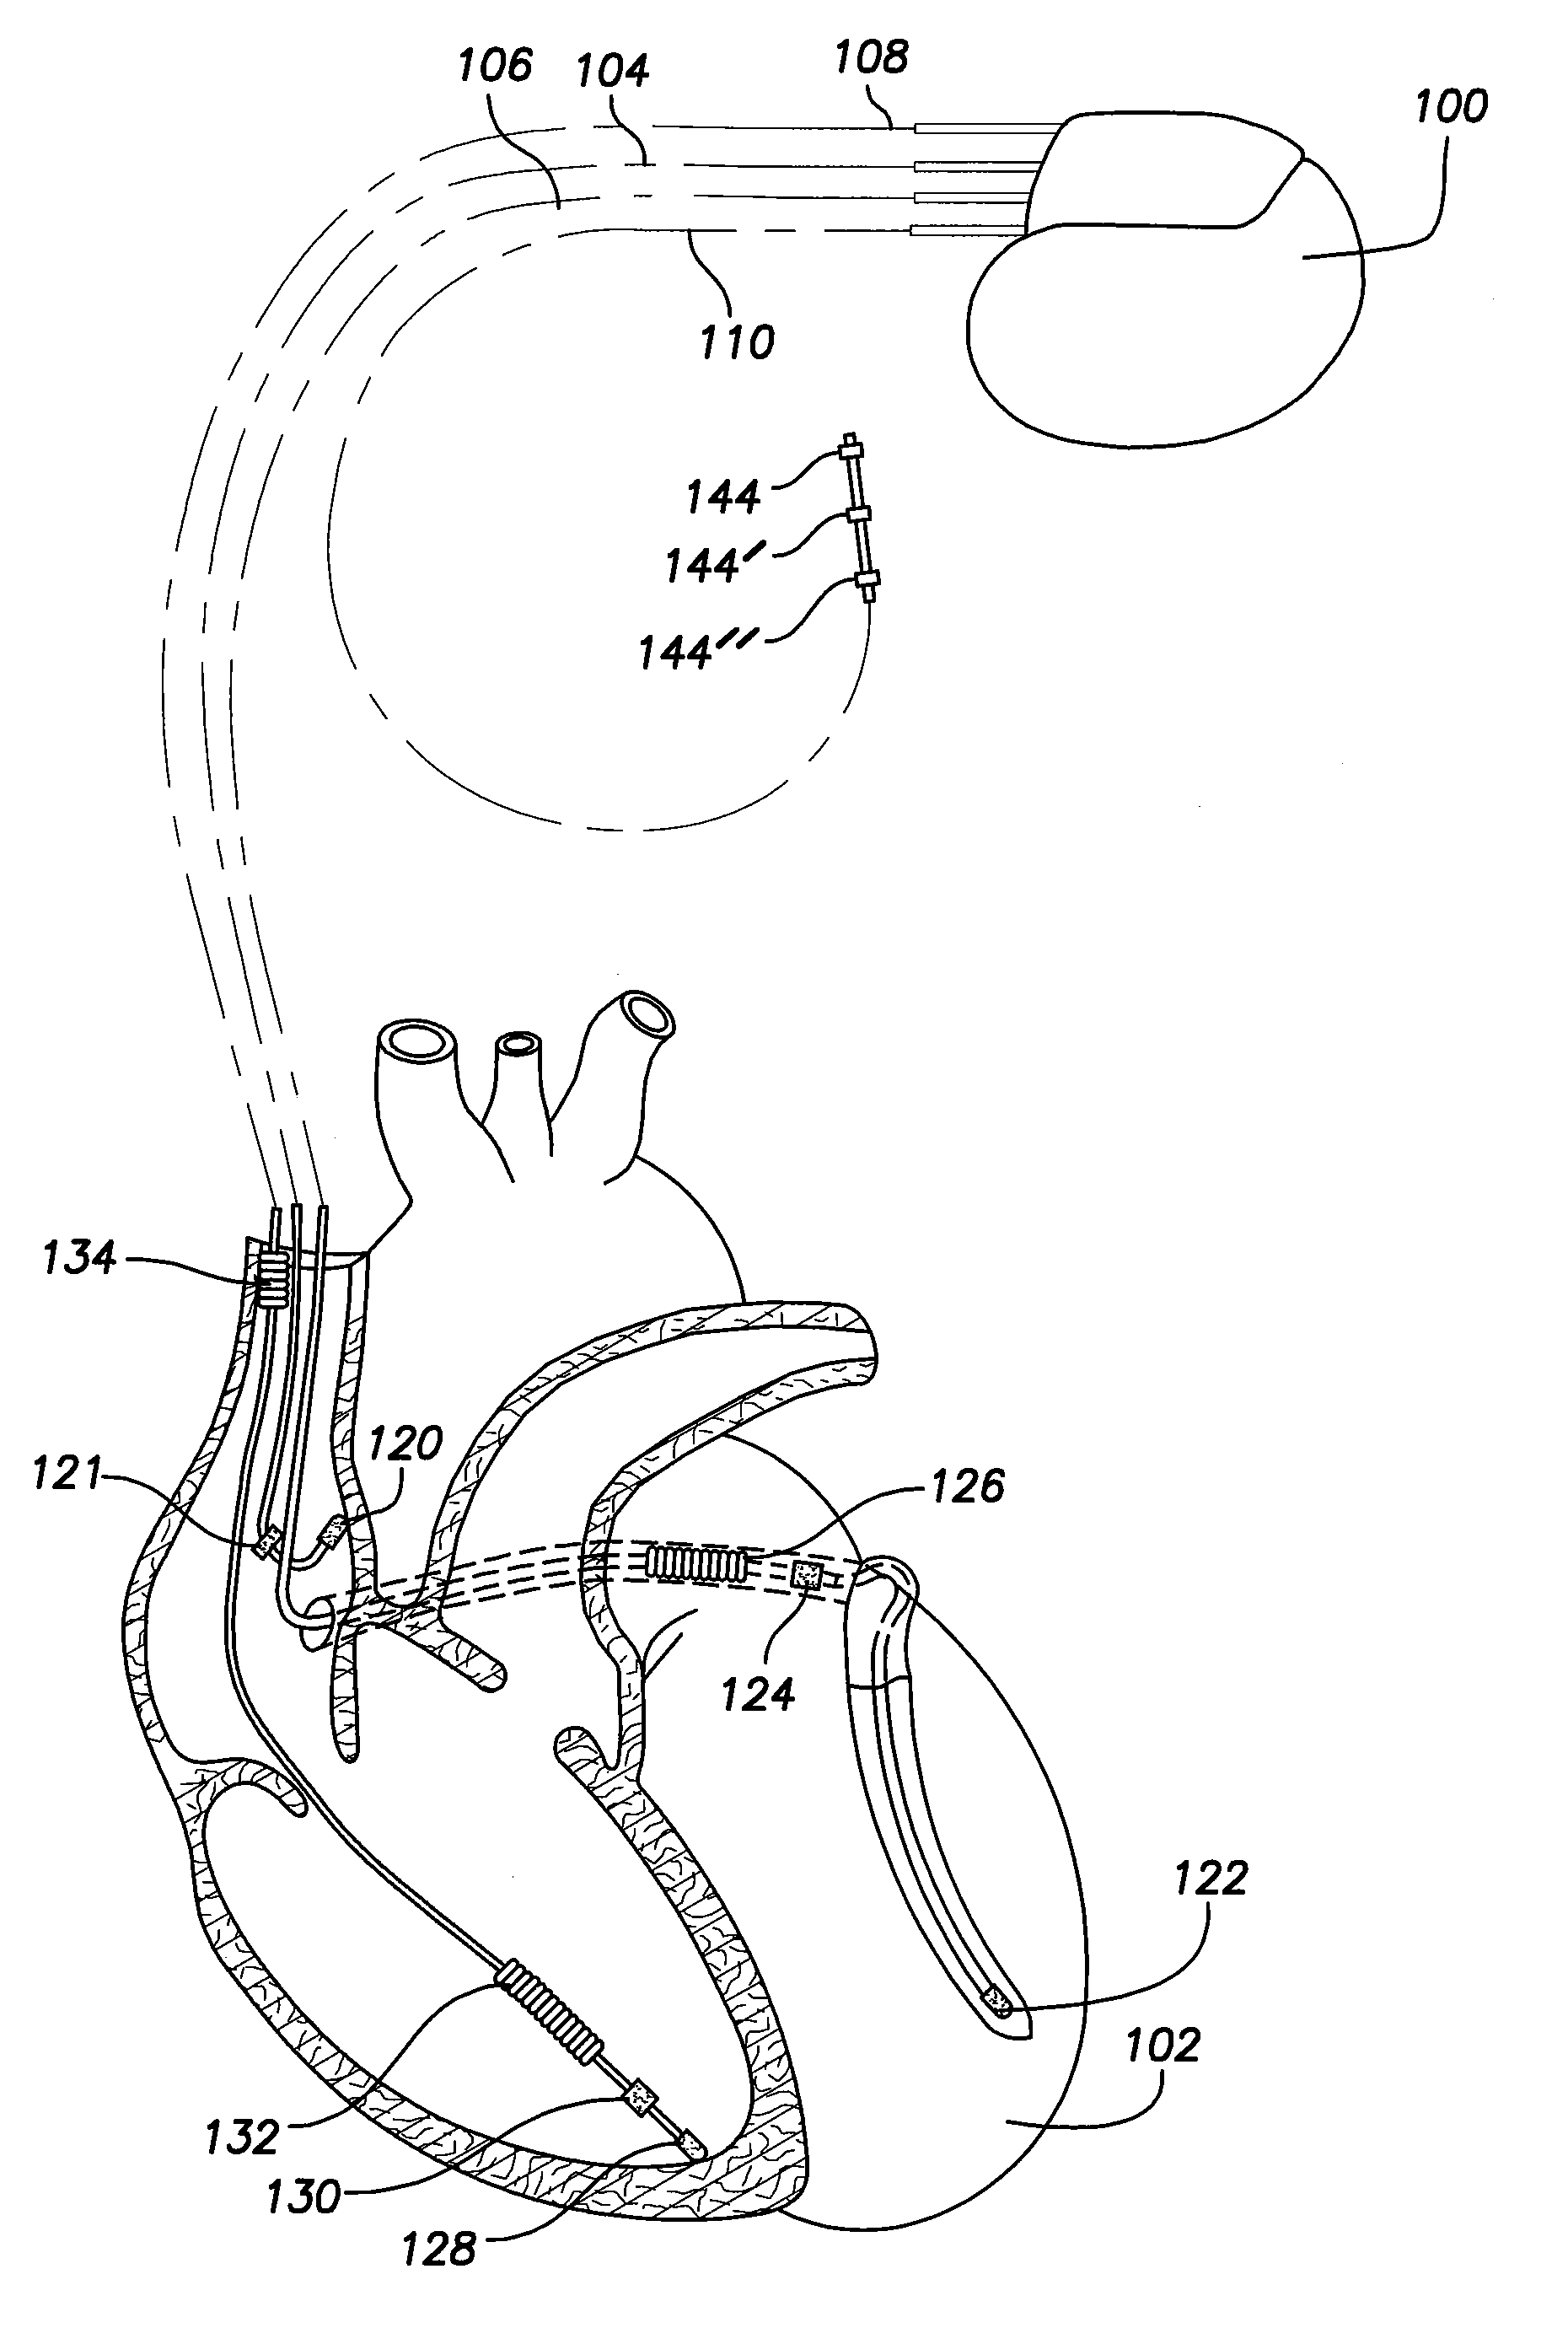 Systems and methods for controlling ventricular pacing in patients with long inter-atrial conduction delays